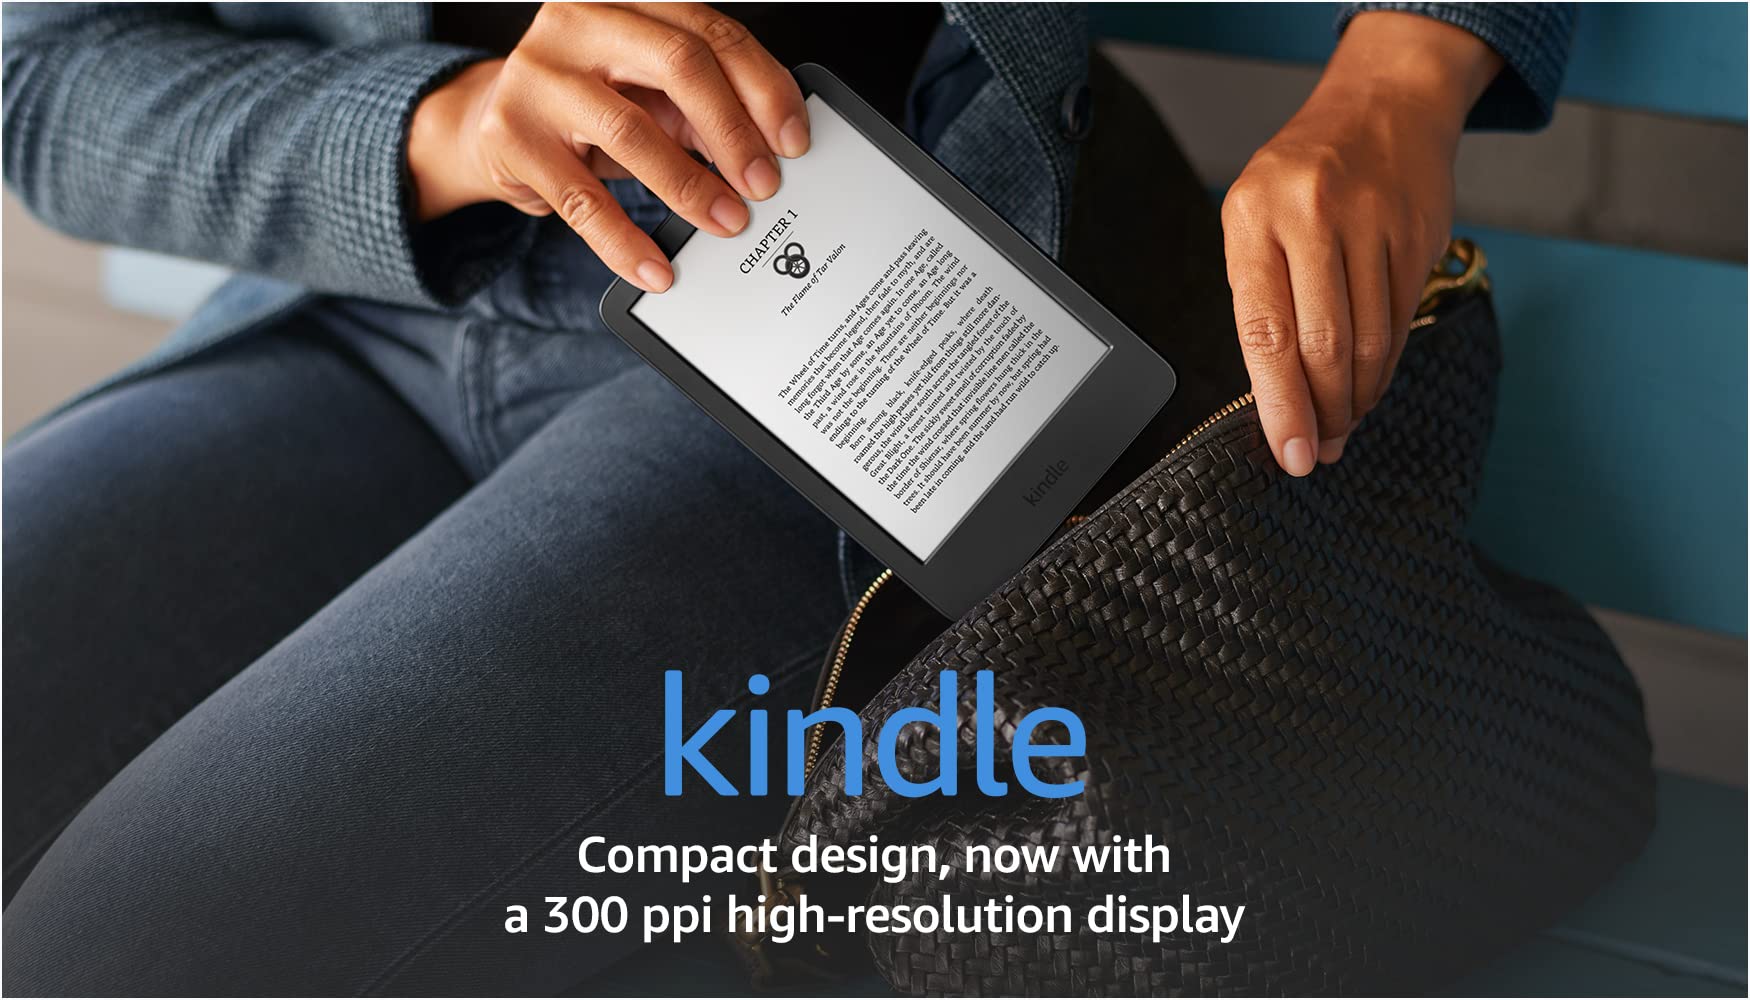 Kindle – The lightest and most compact Kindle, now with a 6” 300 ppi high-resolution display, and 2x the storage – Black